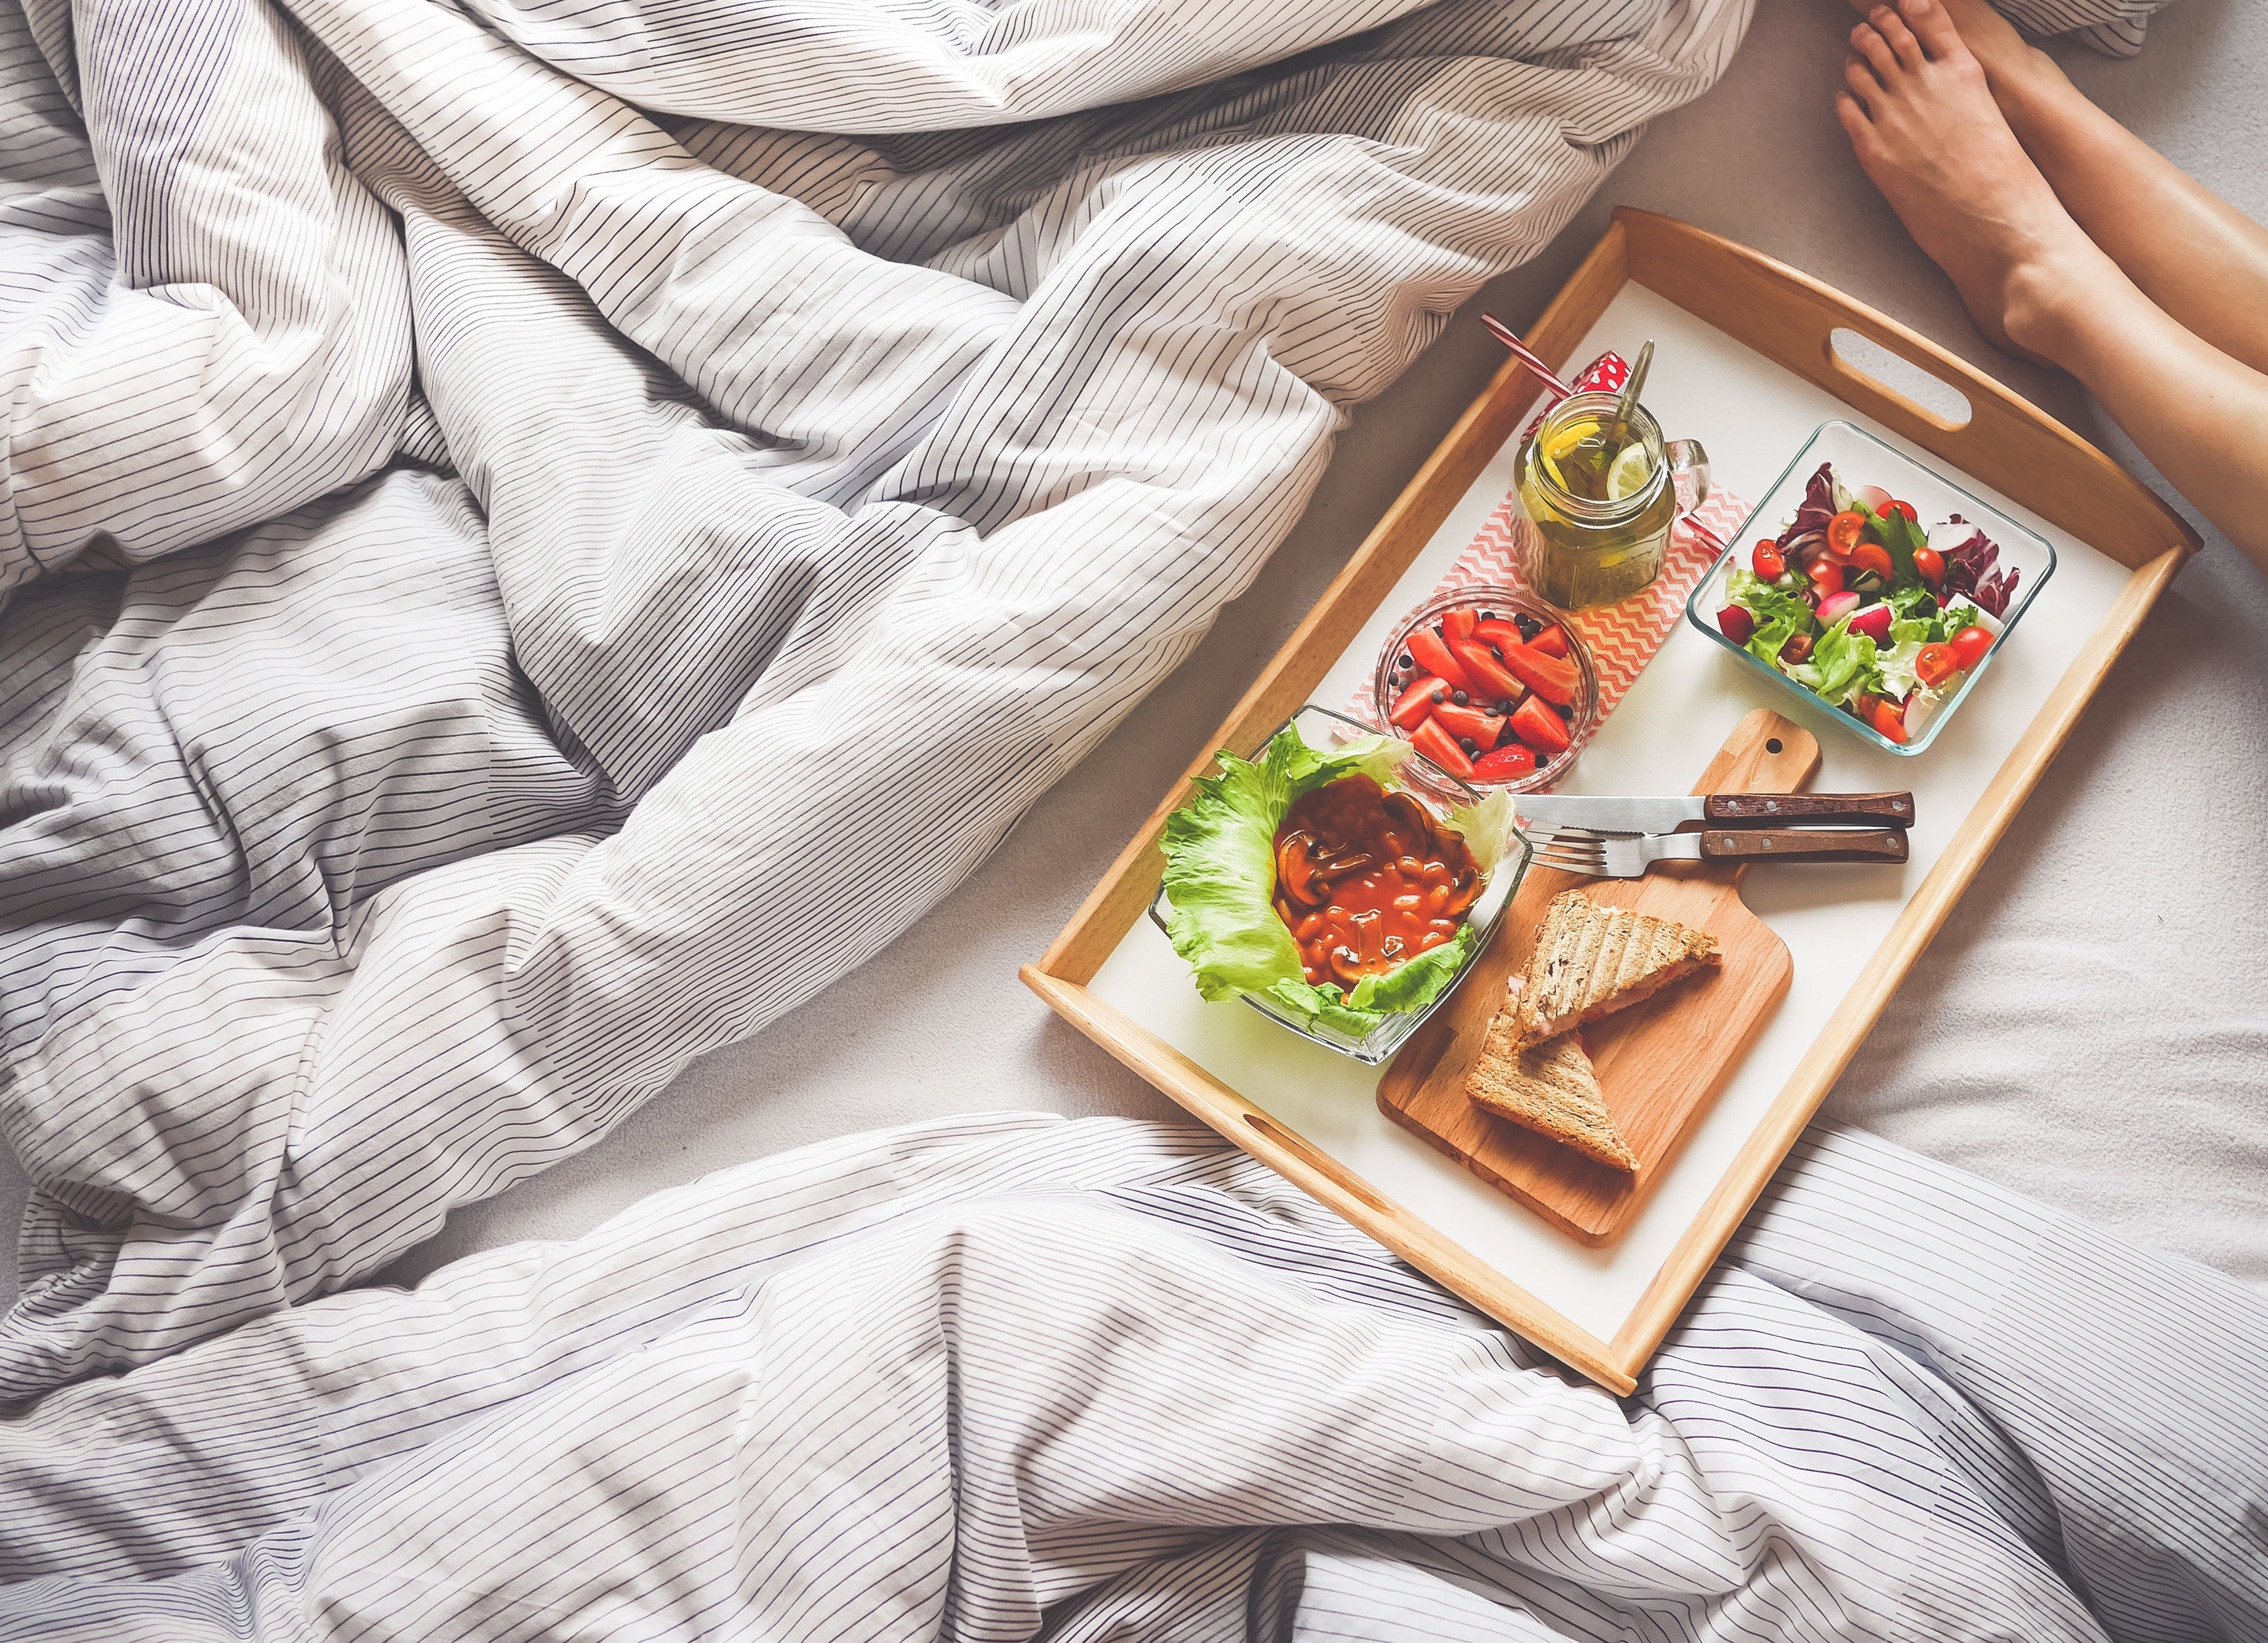 8 Worst Foods to Eat Before Bed